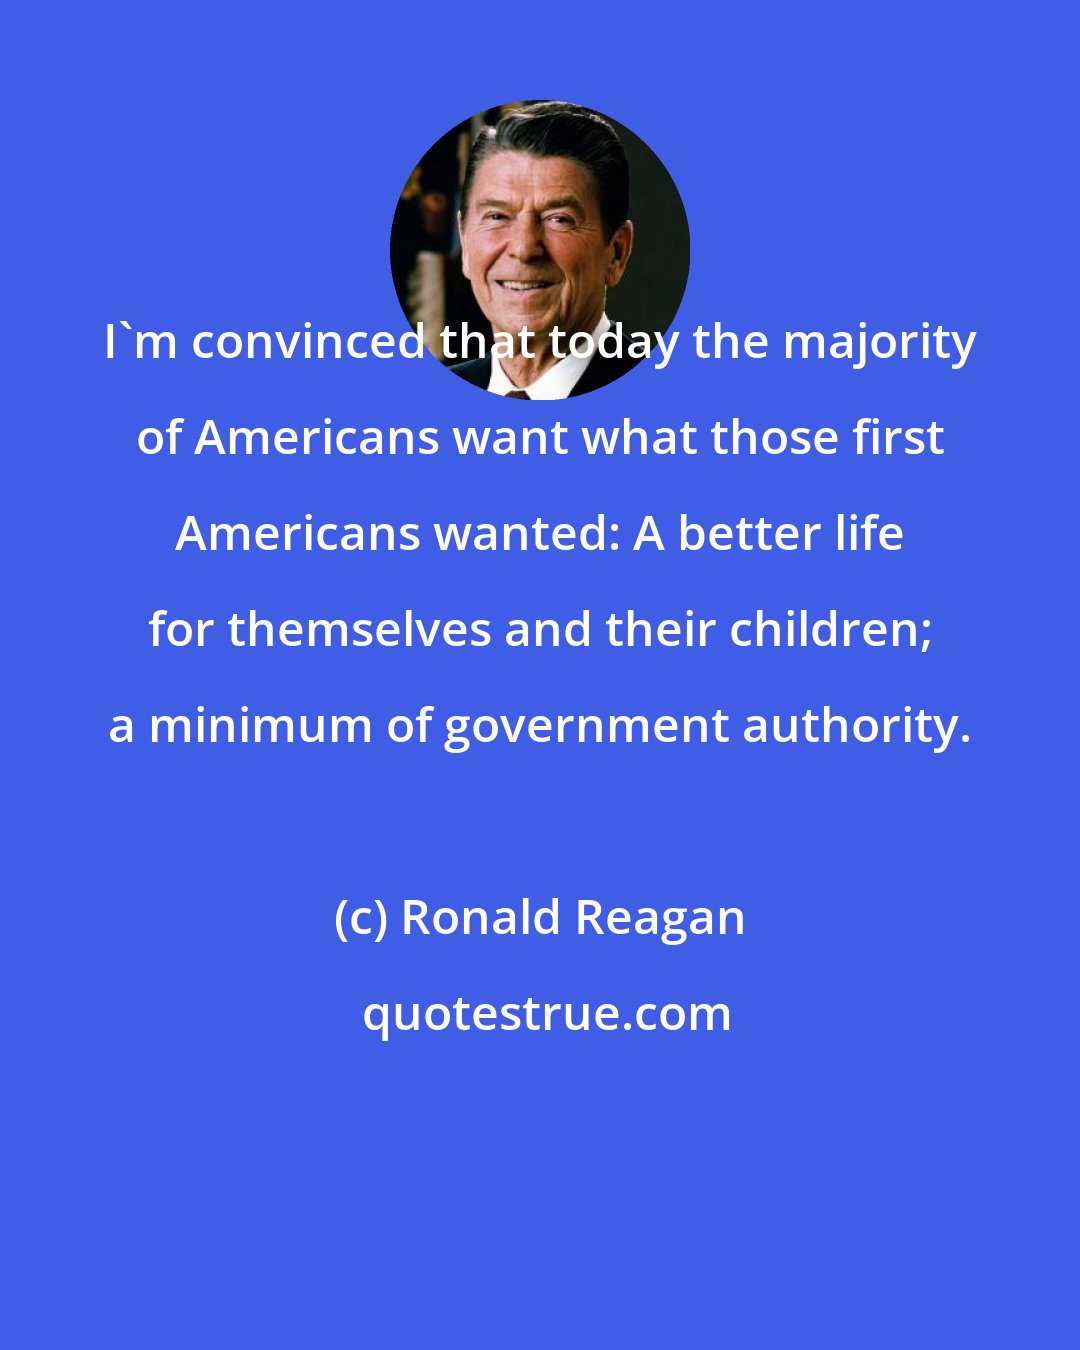 Ronald Reagan: I'm convinced that today the majority of Americans want what those first Americans wanted: A better life for themselves and their children; a minimum of government authority.